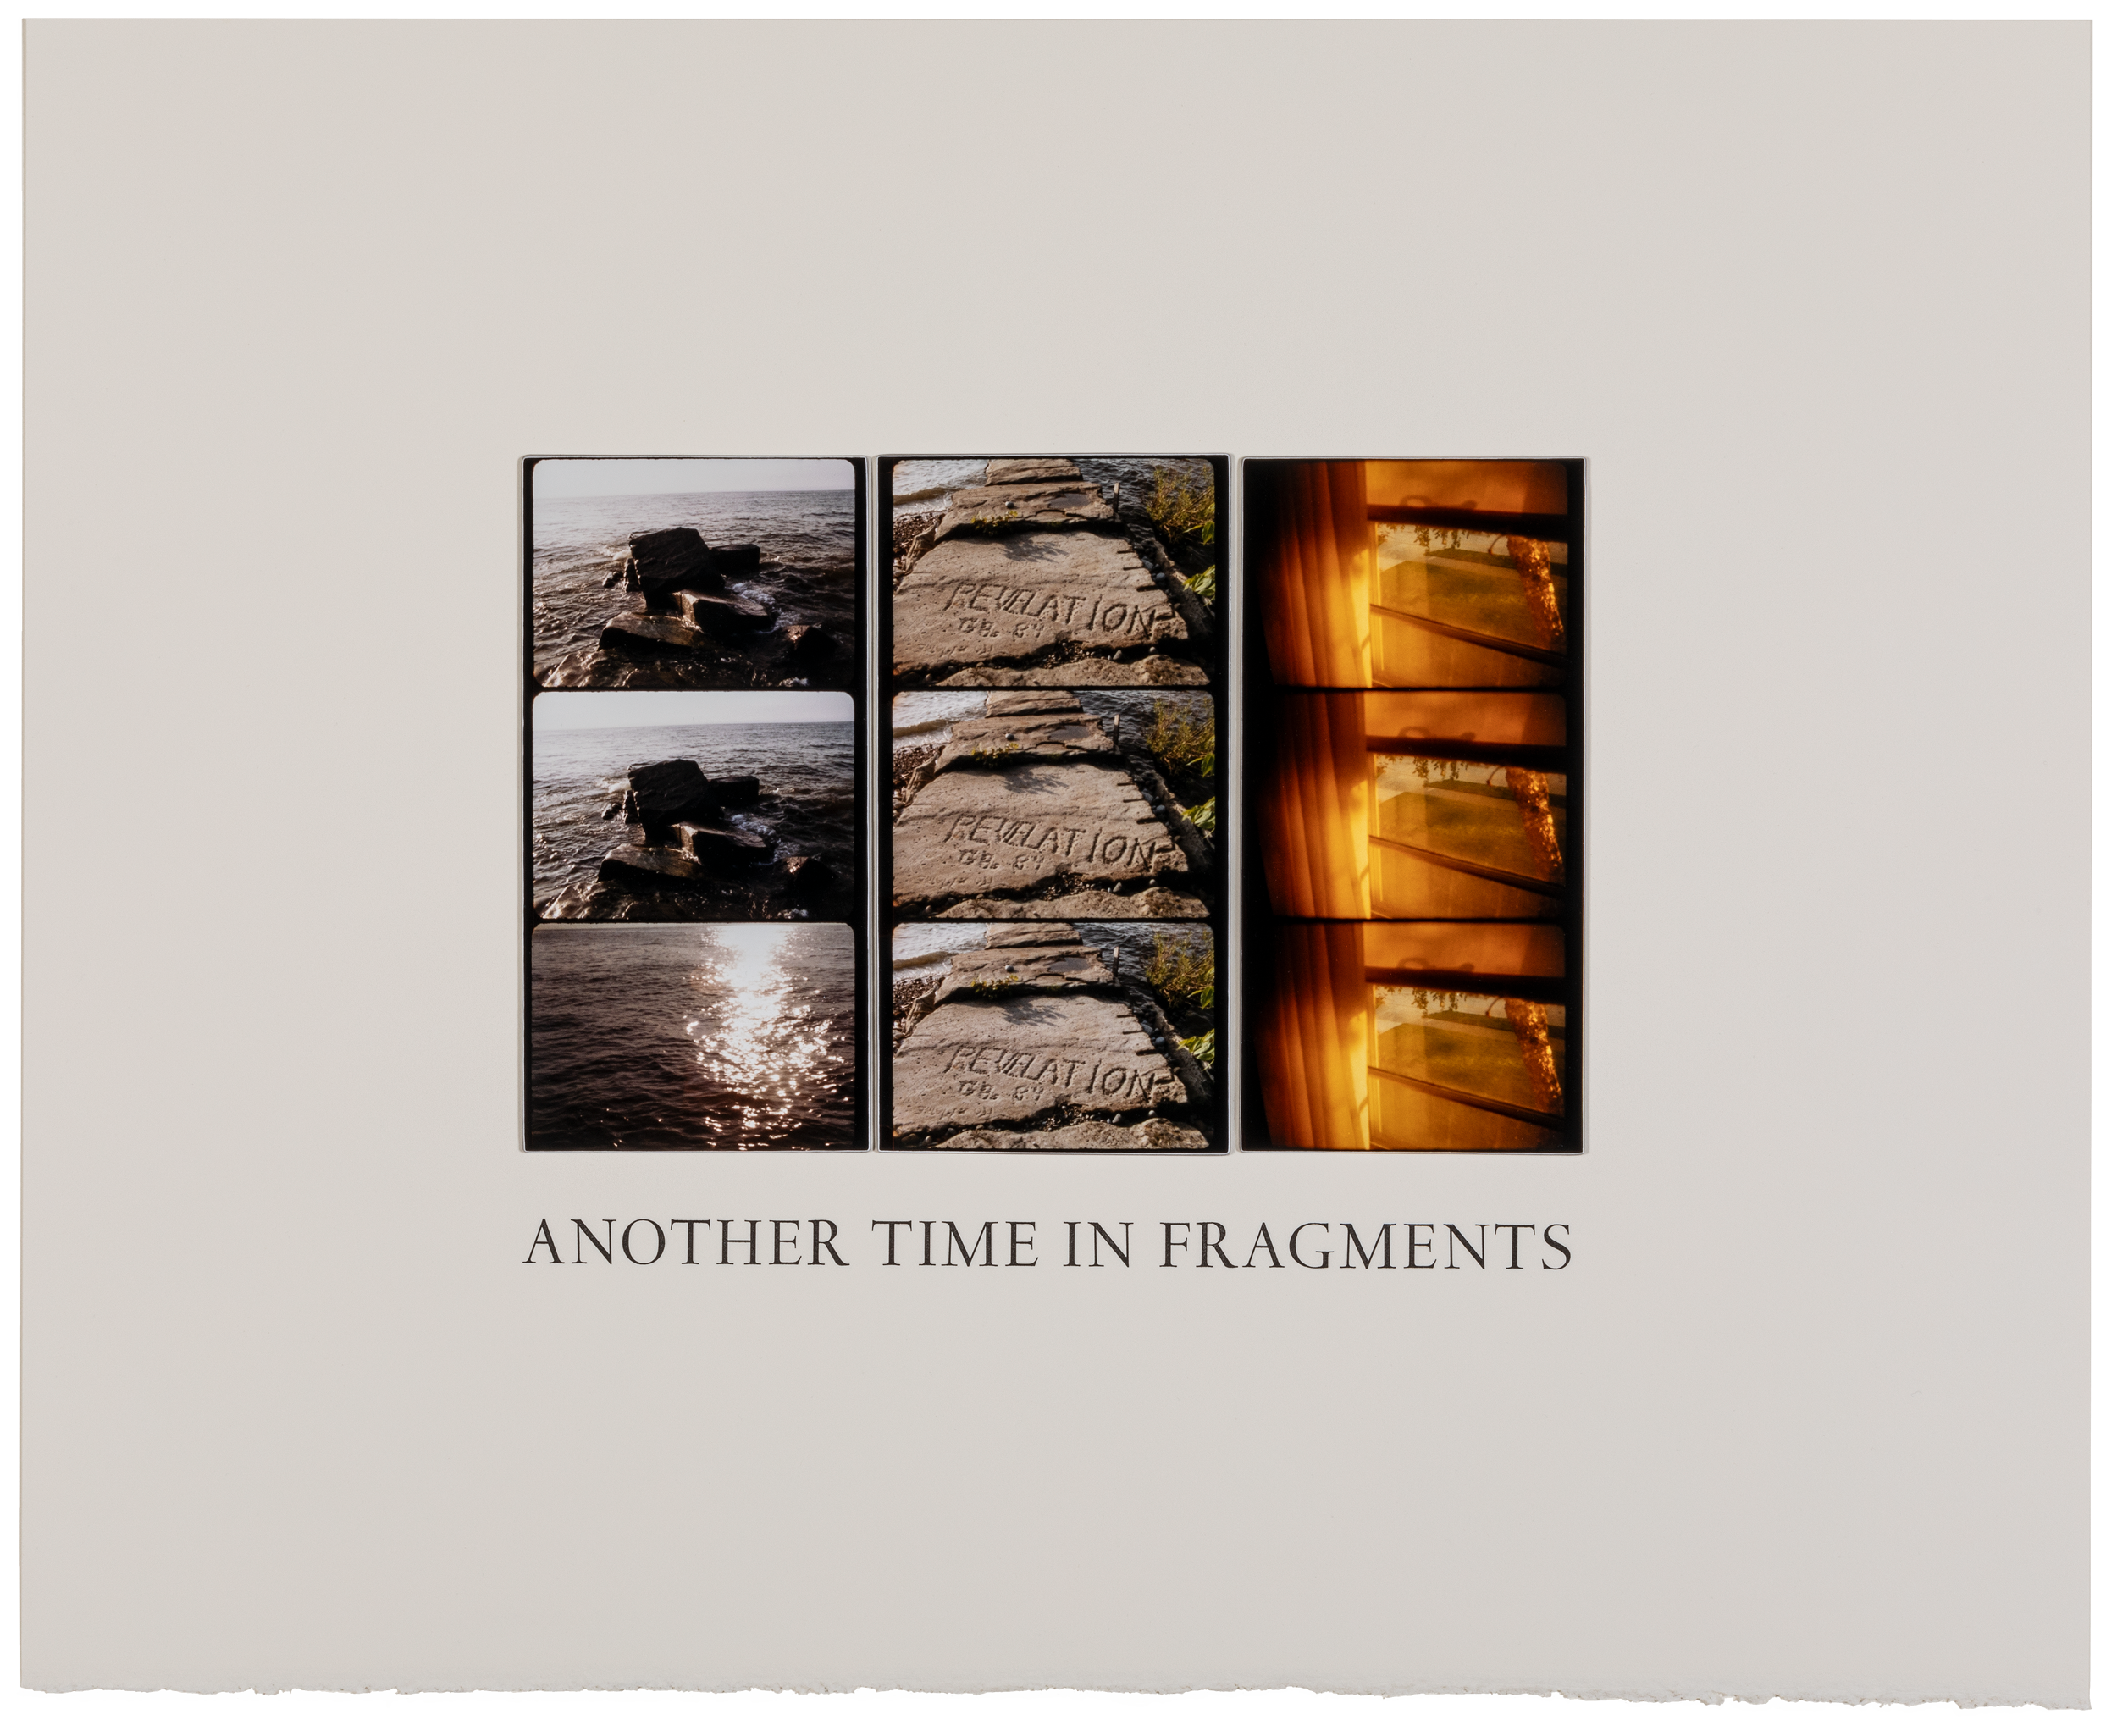 Another Time in Fragments